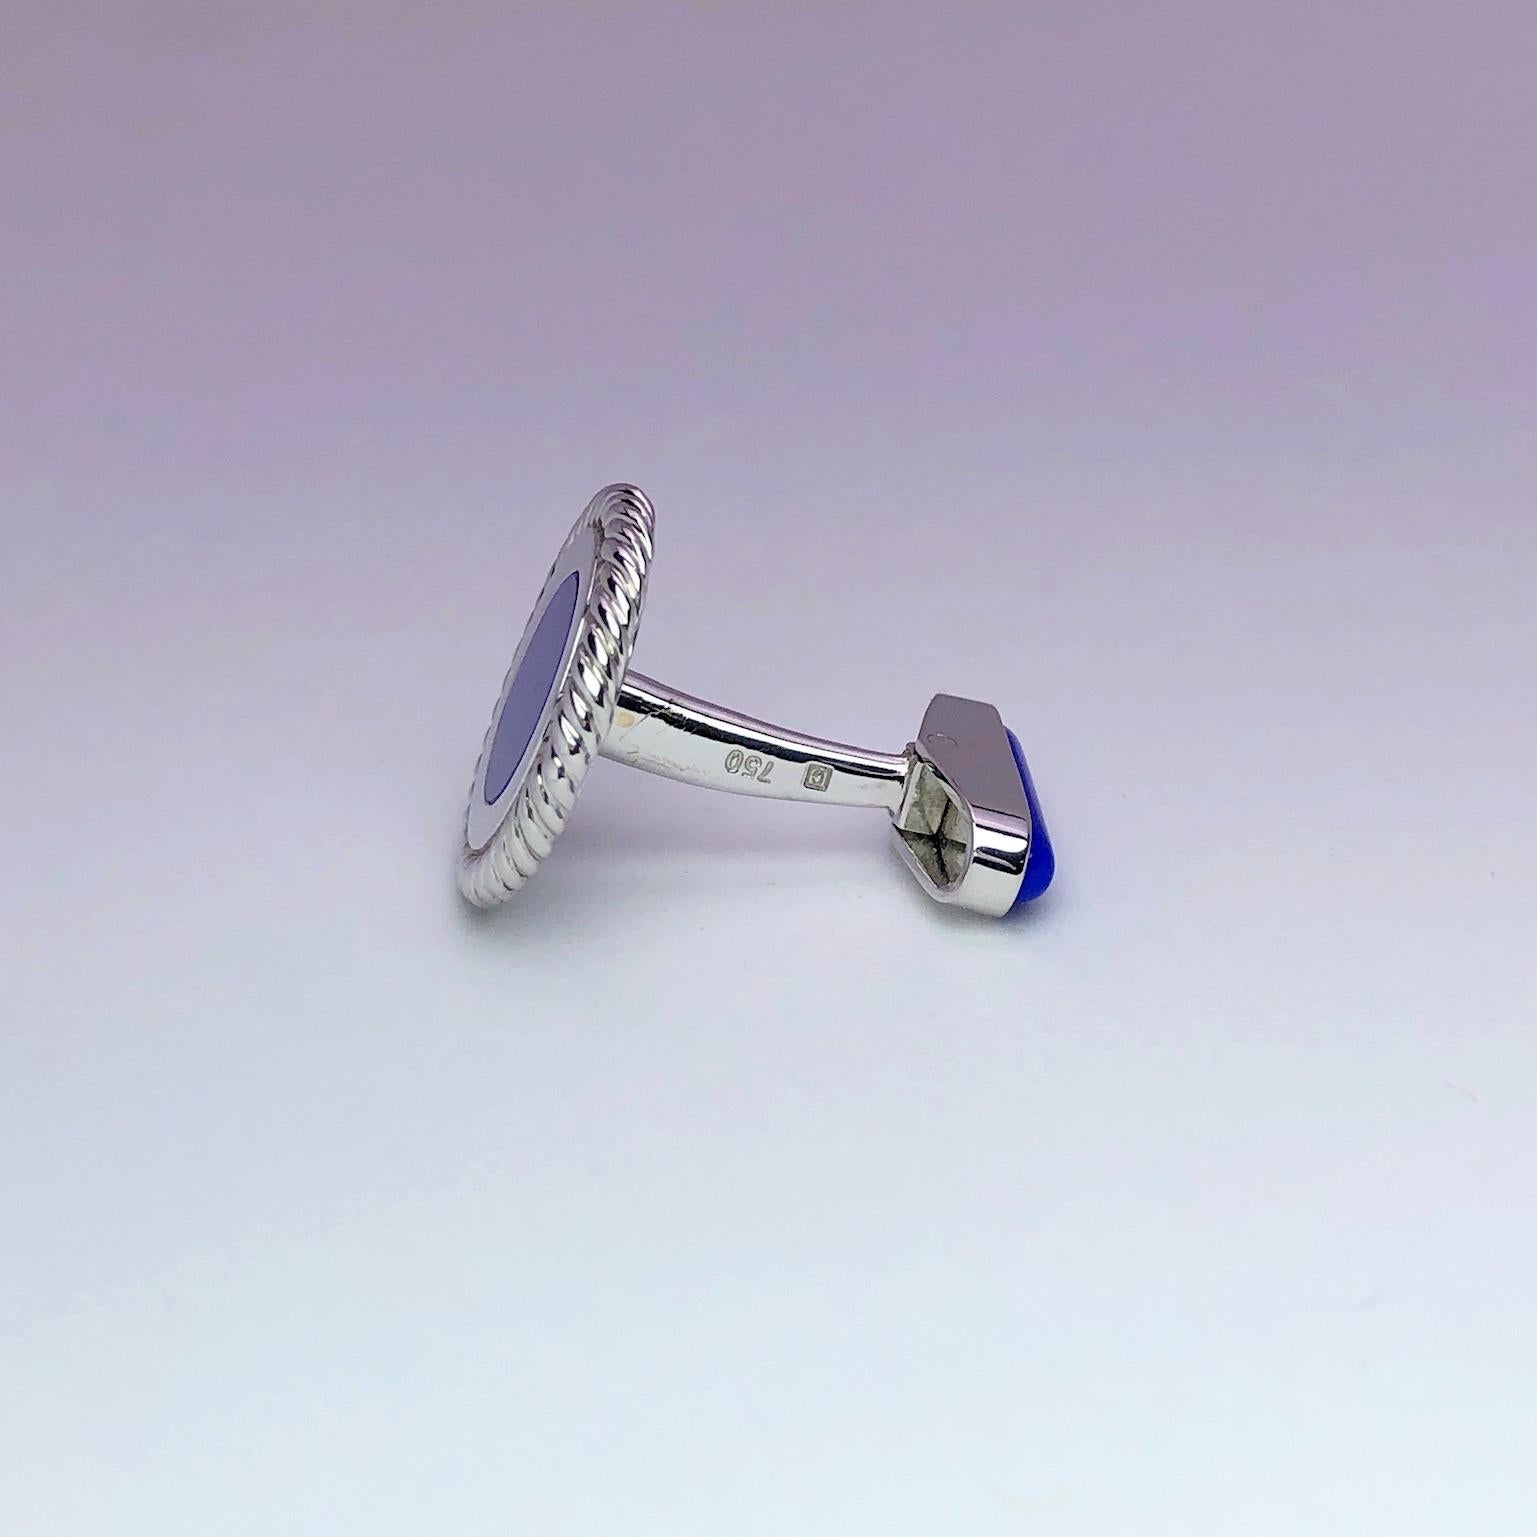 George Gero 18 Karat White Gold Cufflinks with Lapis Lazuli Center In New Condition For Sale In New York, NY